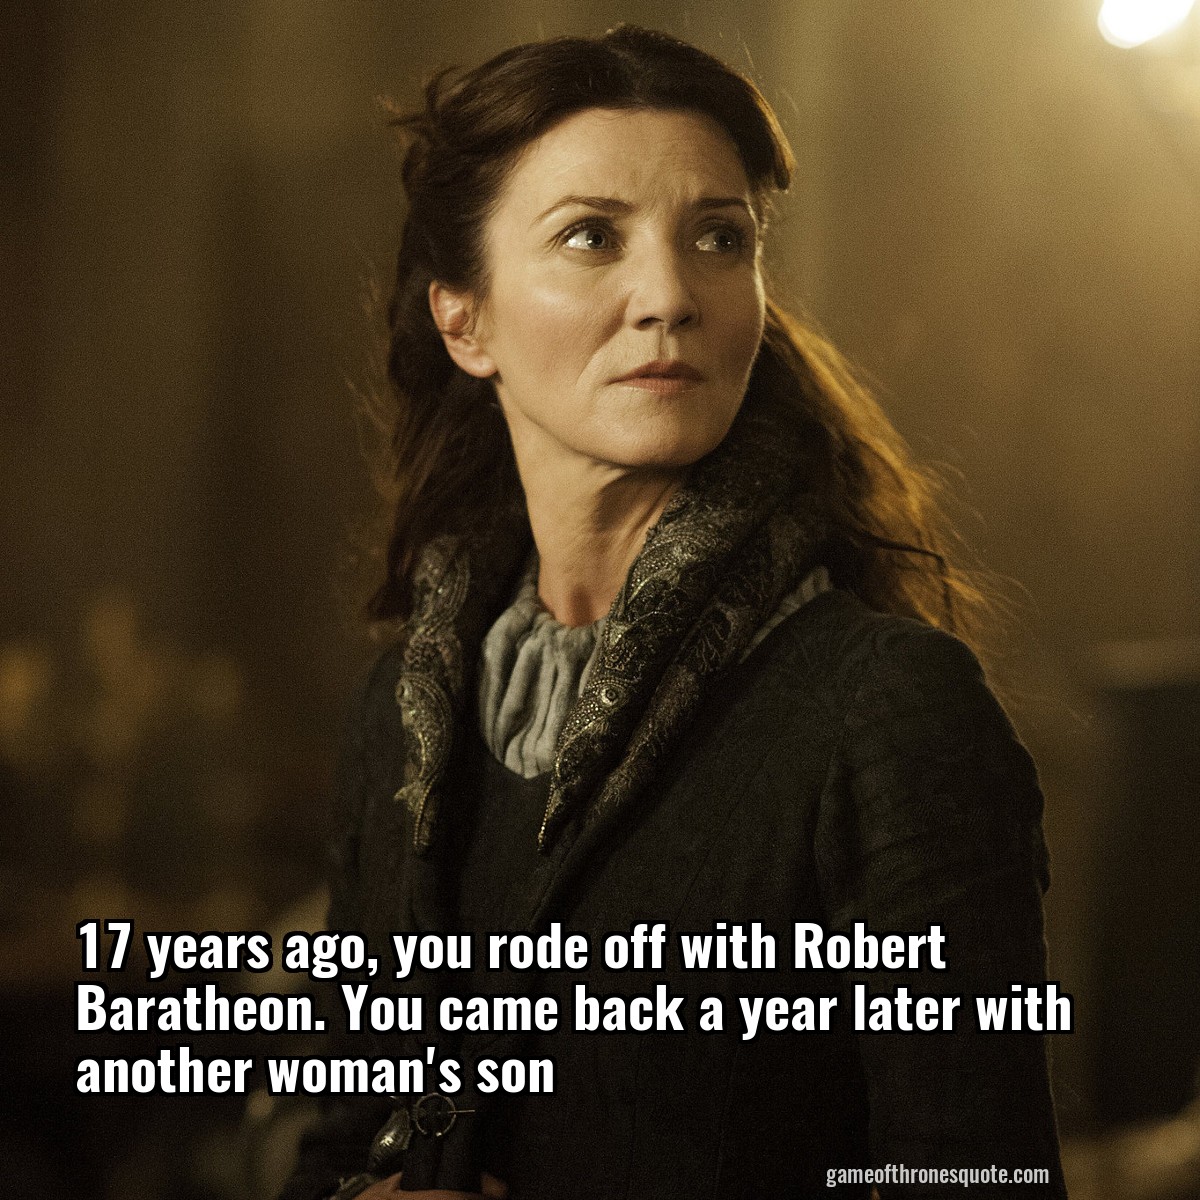 17 years ago, you rode off with Robert Baratheon. You came back a year later with another woman's son